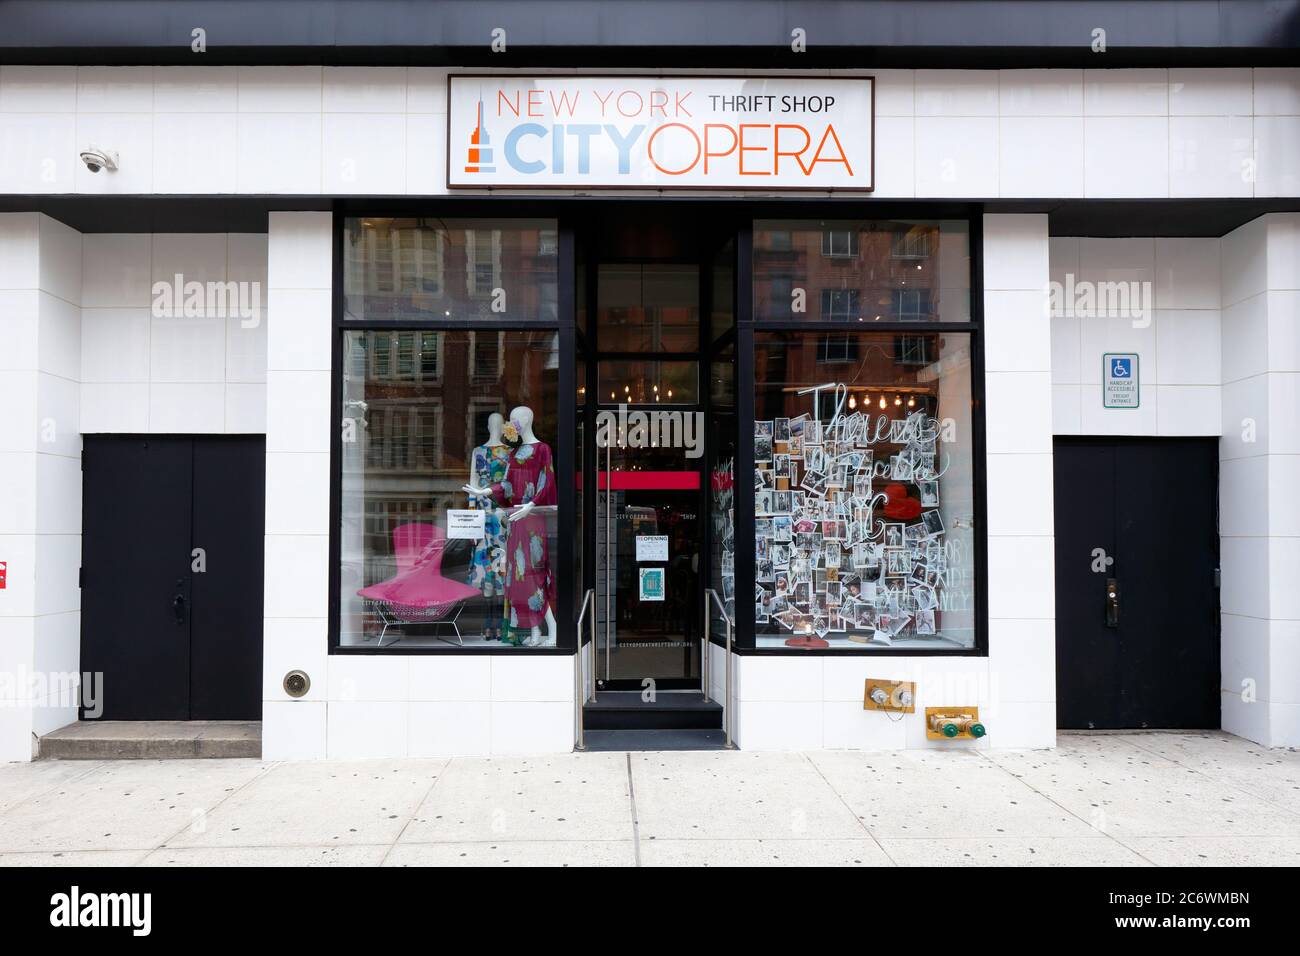 [historical storefront] City Opera Thrift Shop, 222 E 23rd St, New York, NYC storefront photo of a thrift shop benefiting City Opera. Stock Photo